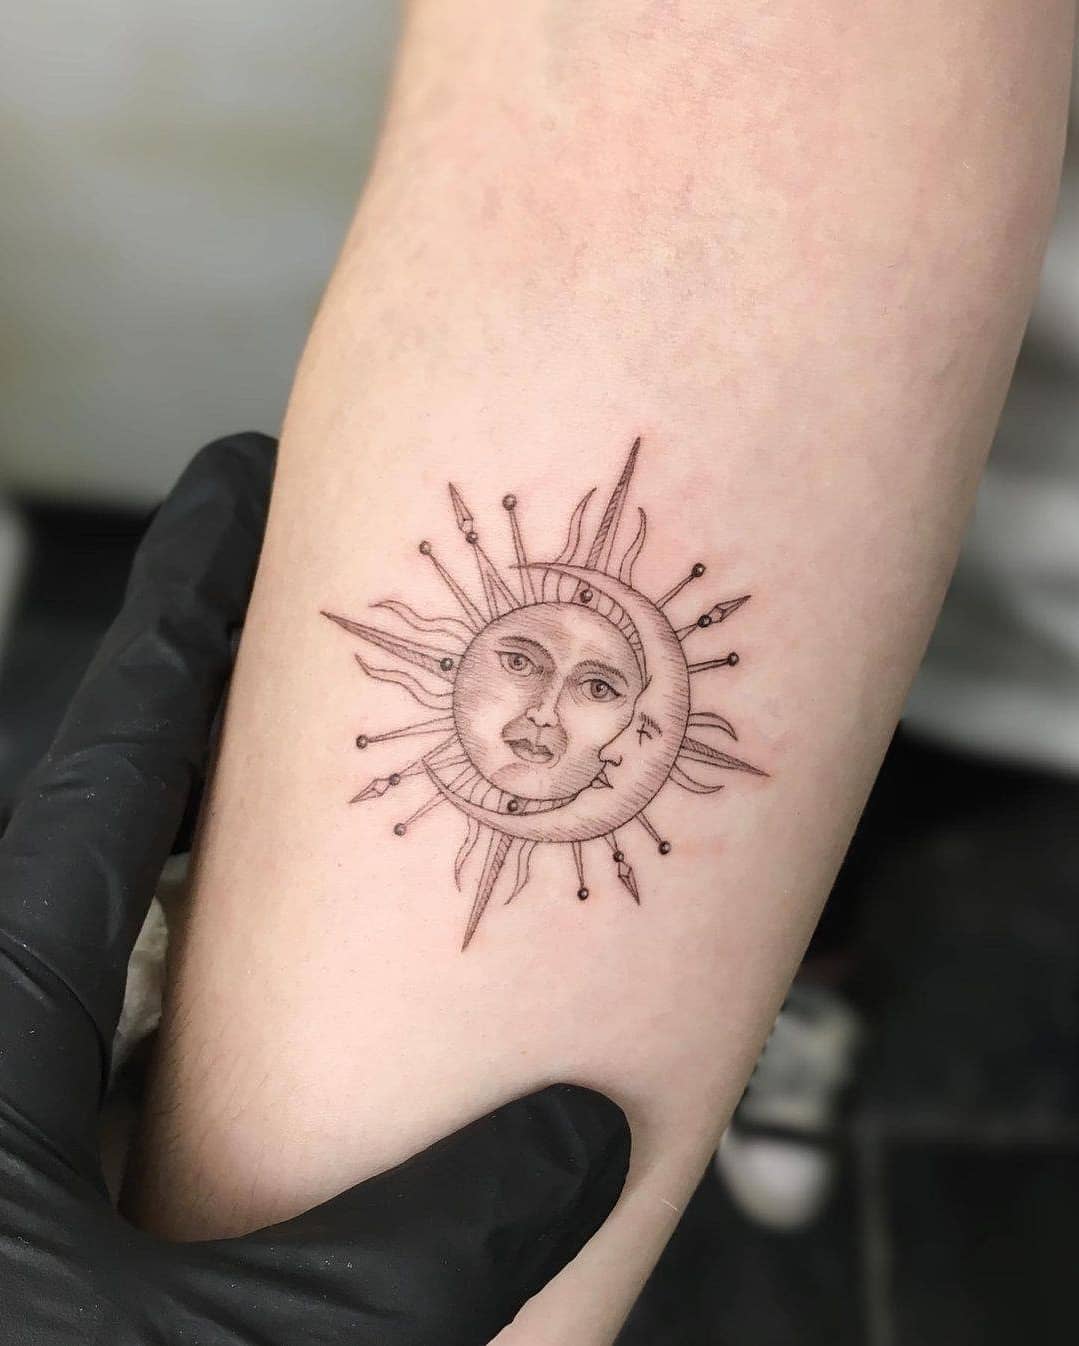 Initial tattoo designs are among the most popular tattoos in the tiny tattoo  category. They are typically small and precise, but they con... | Instagram